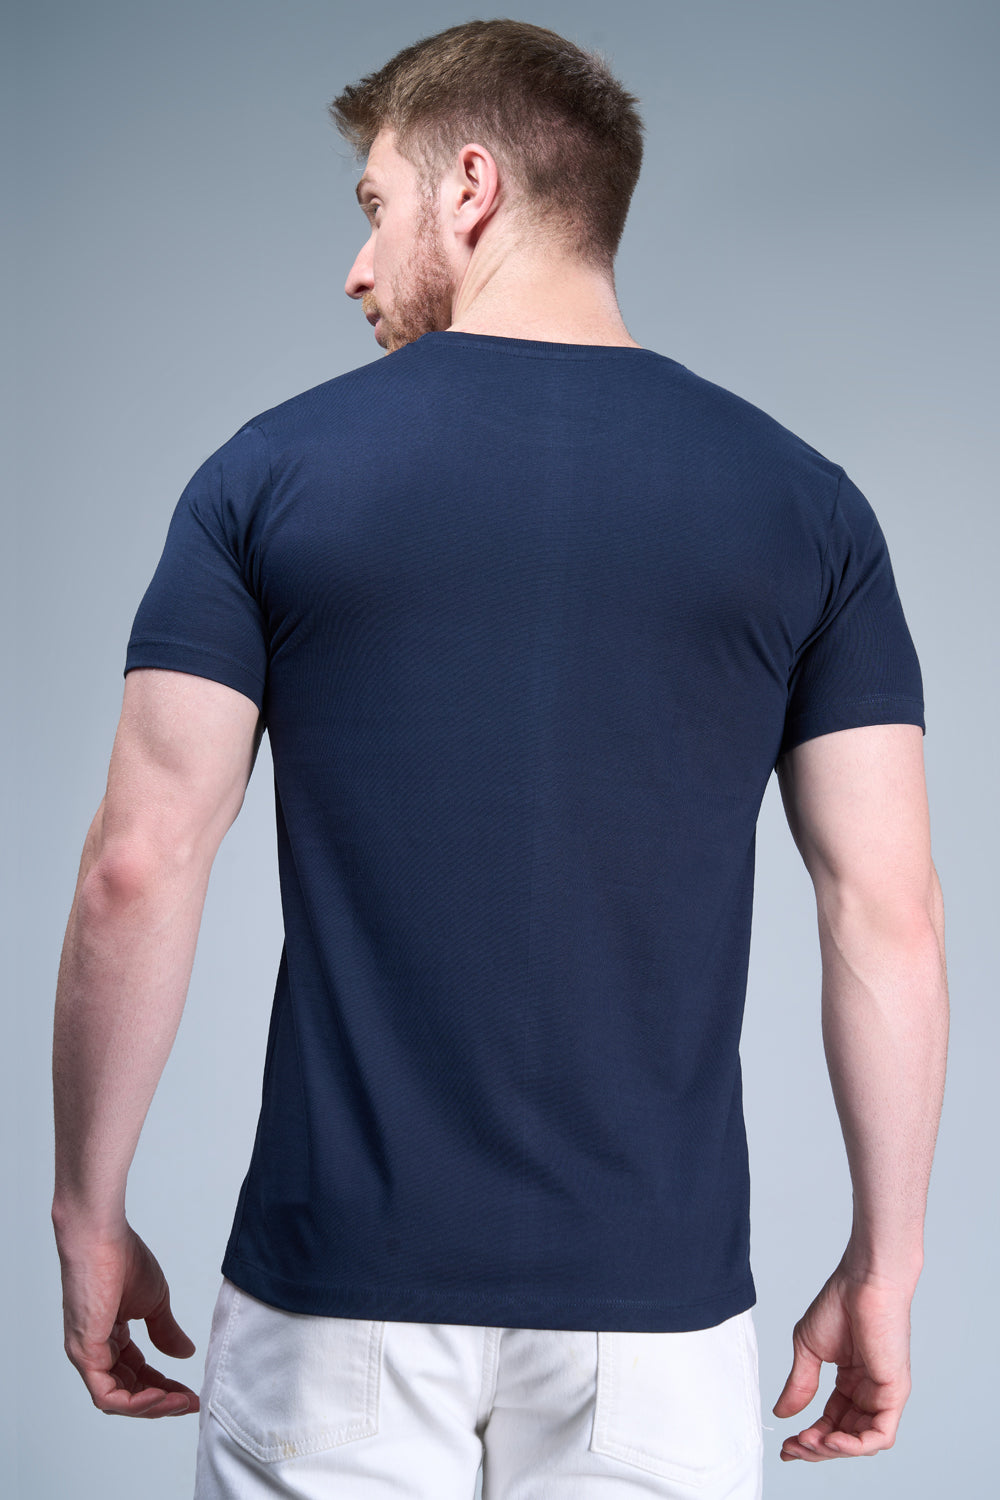 Dark navy colored, cotton Graphic T shirt for men, half sleeves and round neck, back view.